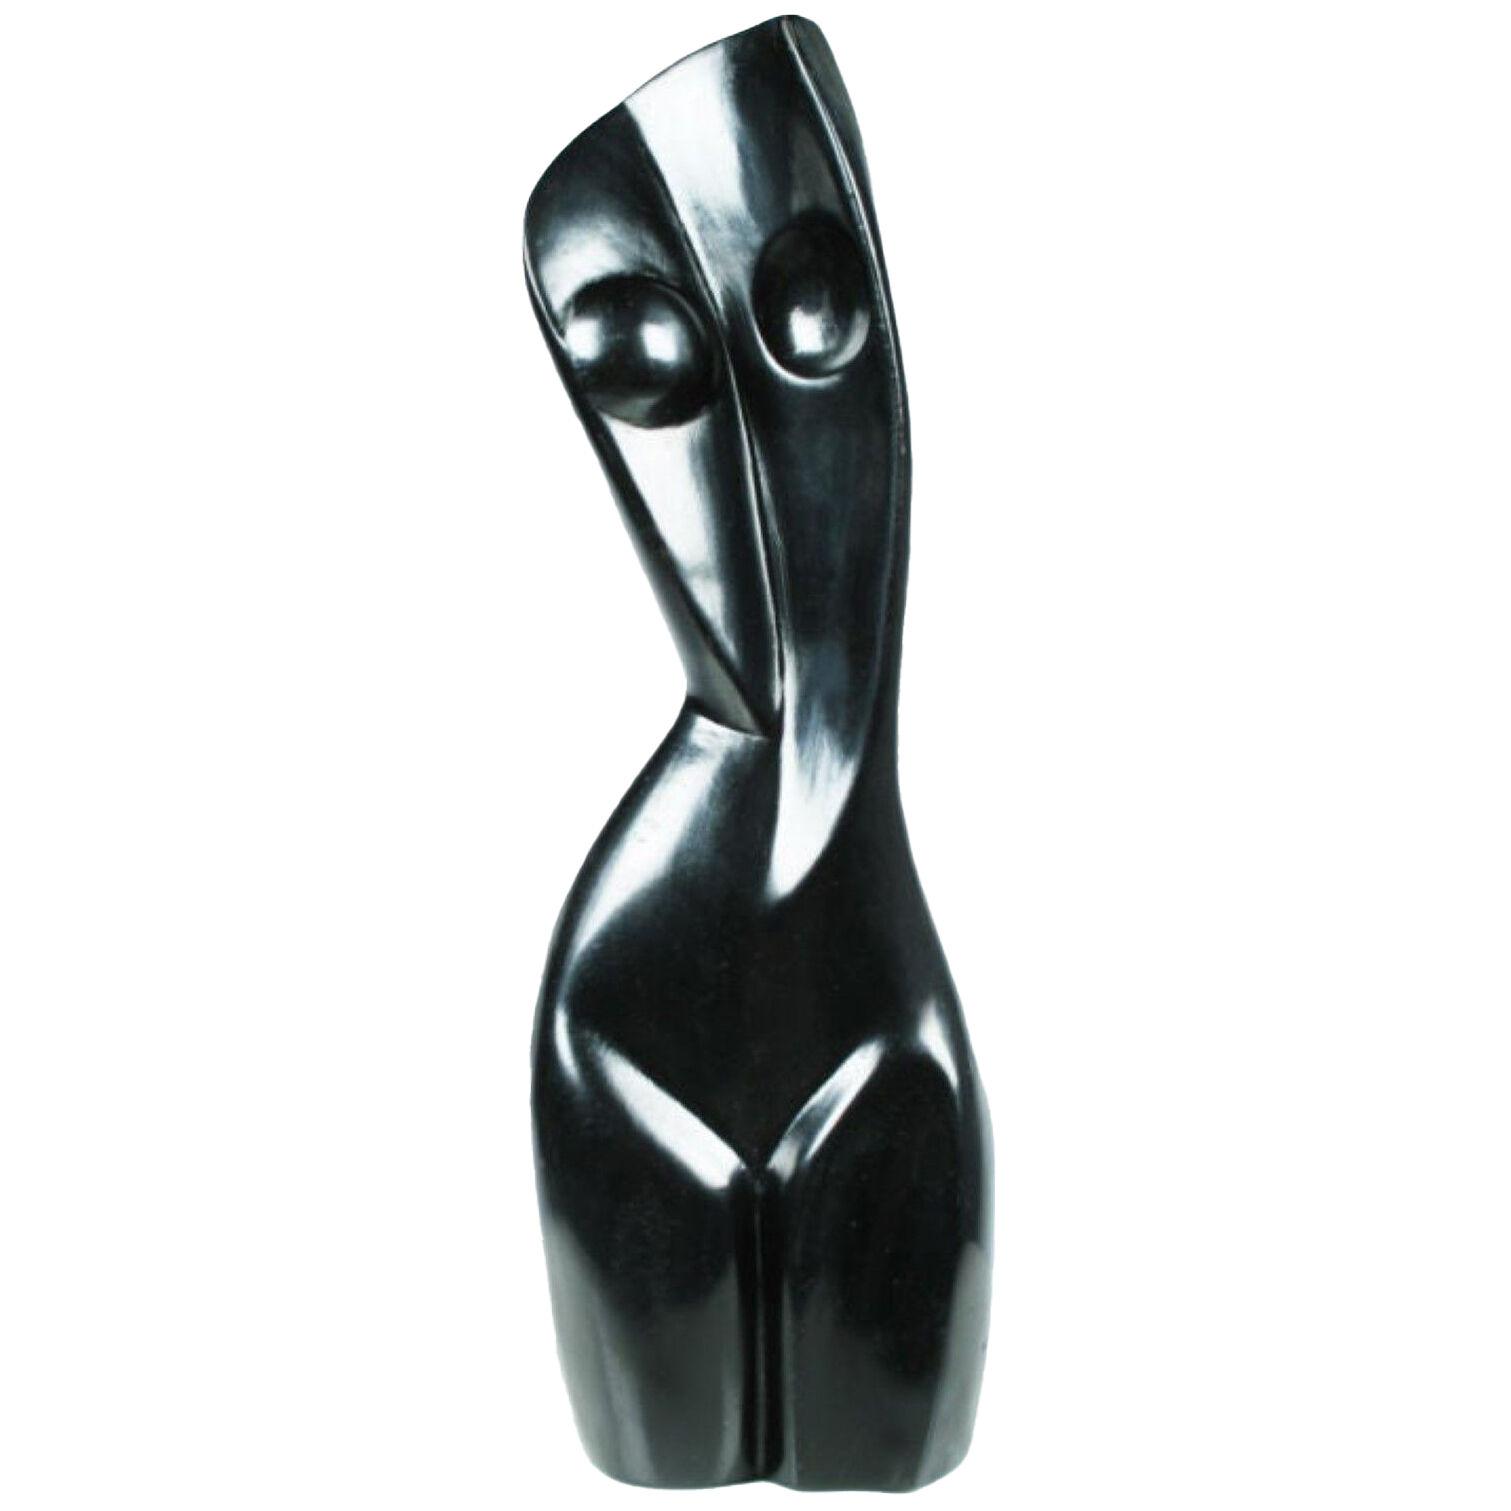 Abstract Female Nude Sculpture	